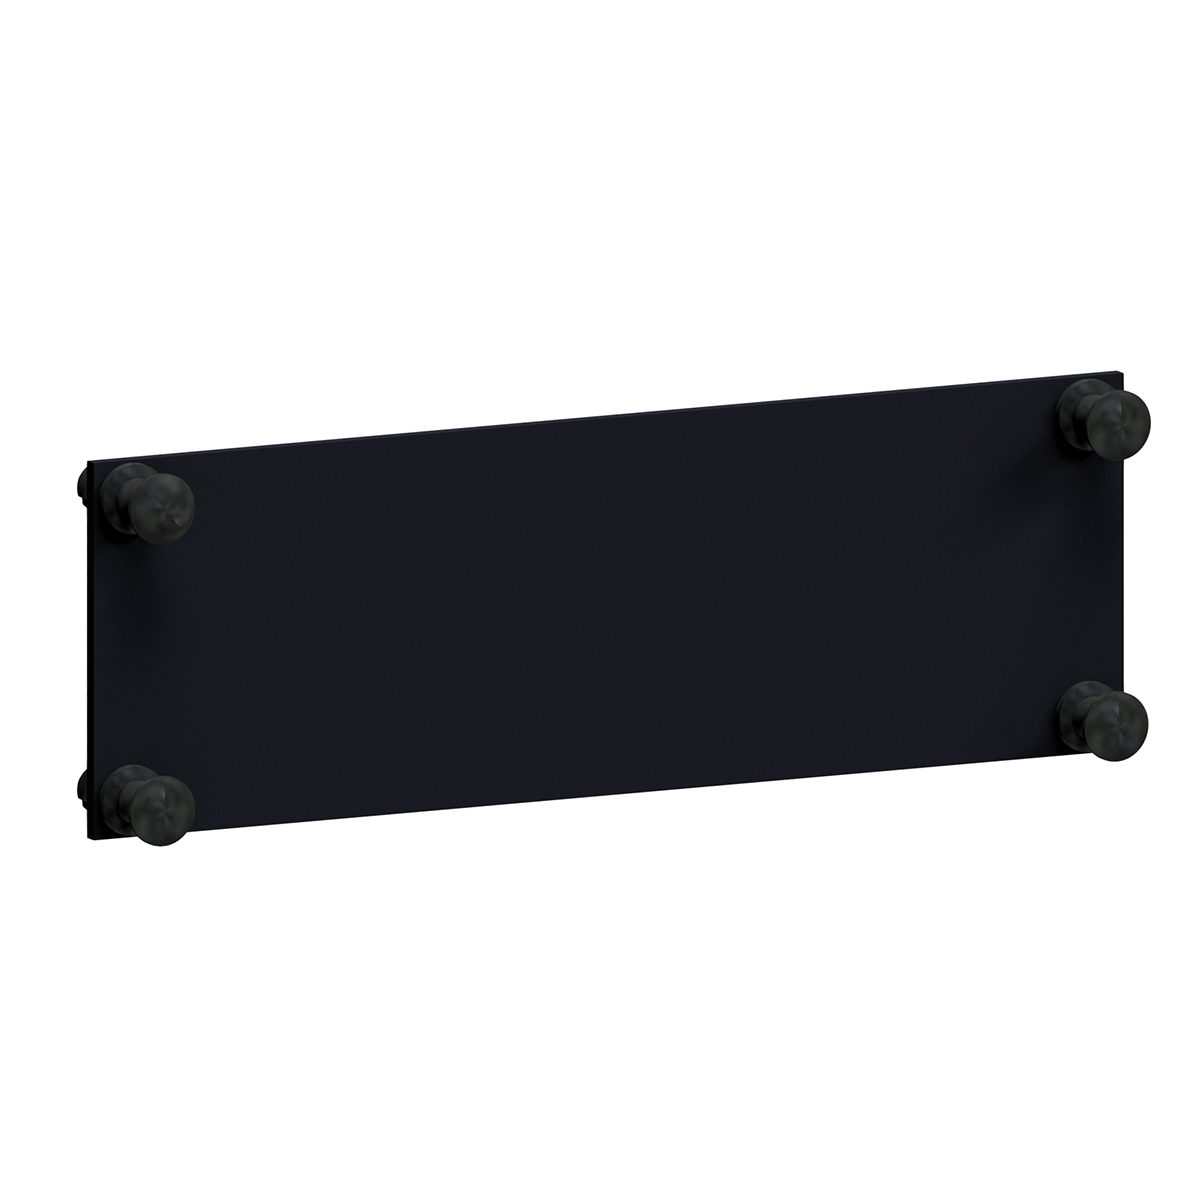 SMAP-G2 SD 1 HU 1/4 blind part front plate